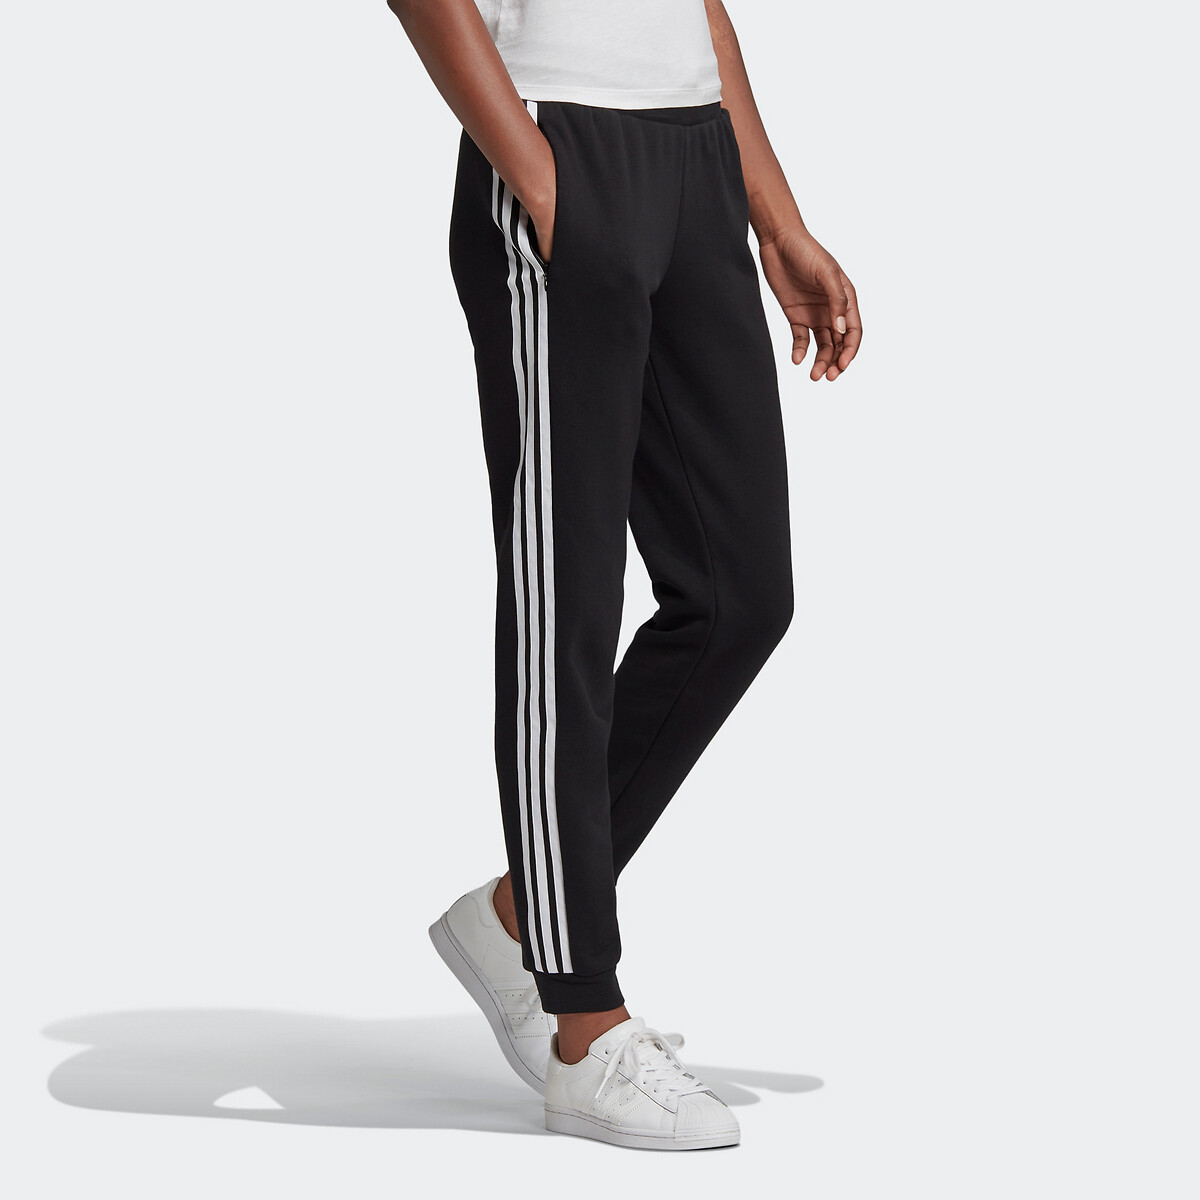 Adidas Workout Gear Has Me Up & Running This Spring - The Mom Edit